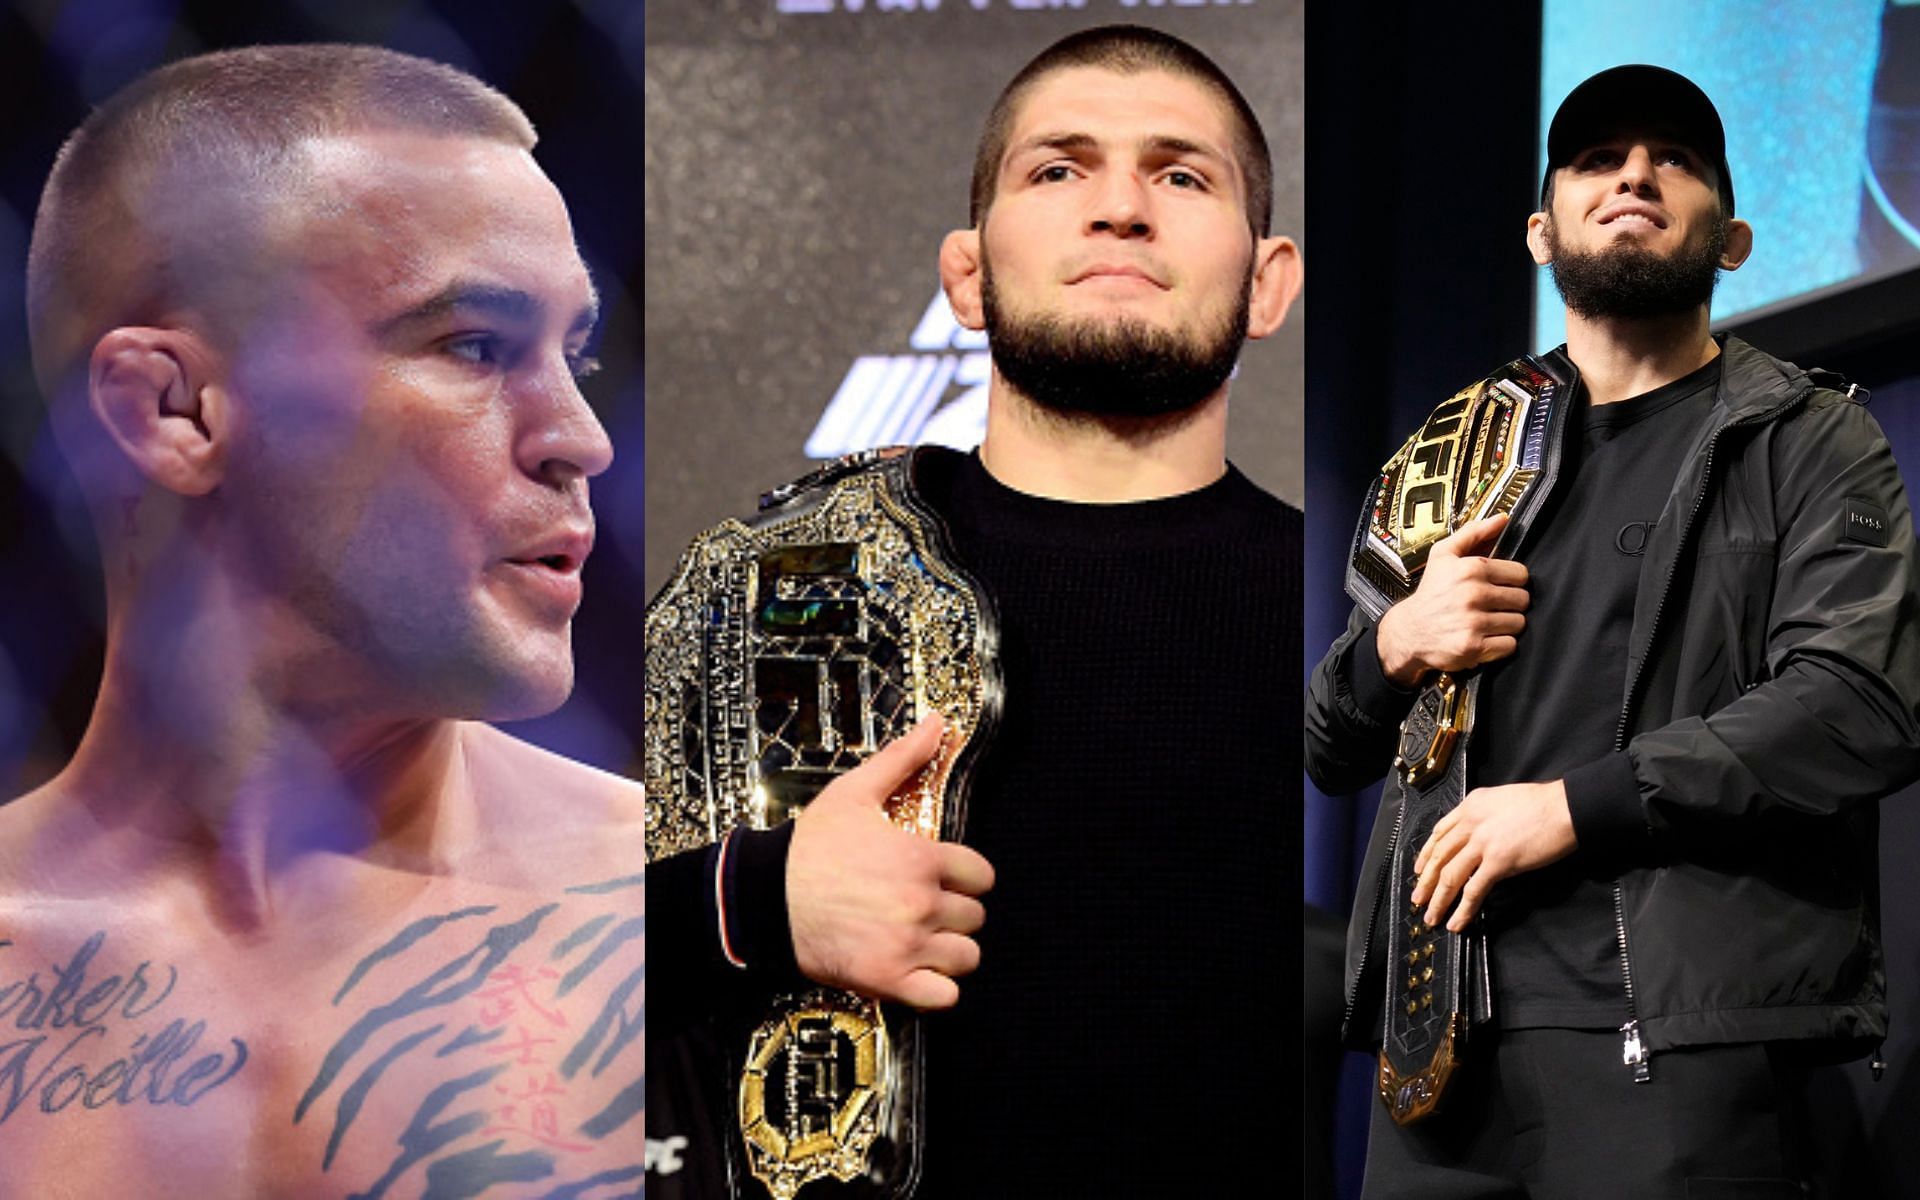 Dustin Poirier (left) reflects on title losses to Khabib Nurmagomedov (center) and Islam Makhachev (right) [Image credits: Getty Images, @MAKHACHEVMMA/X]]